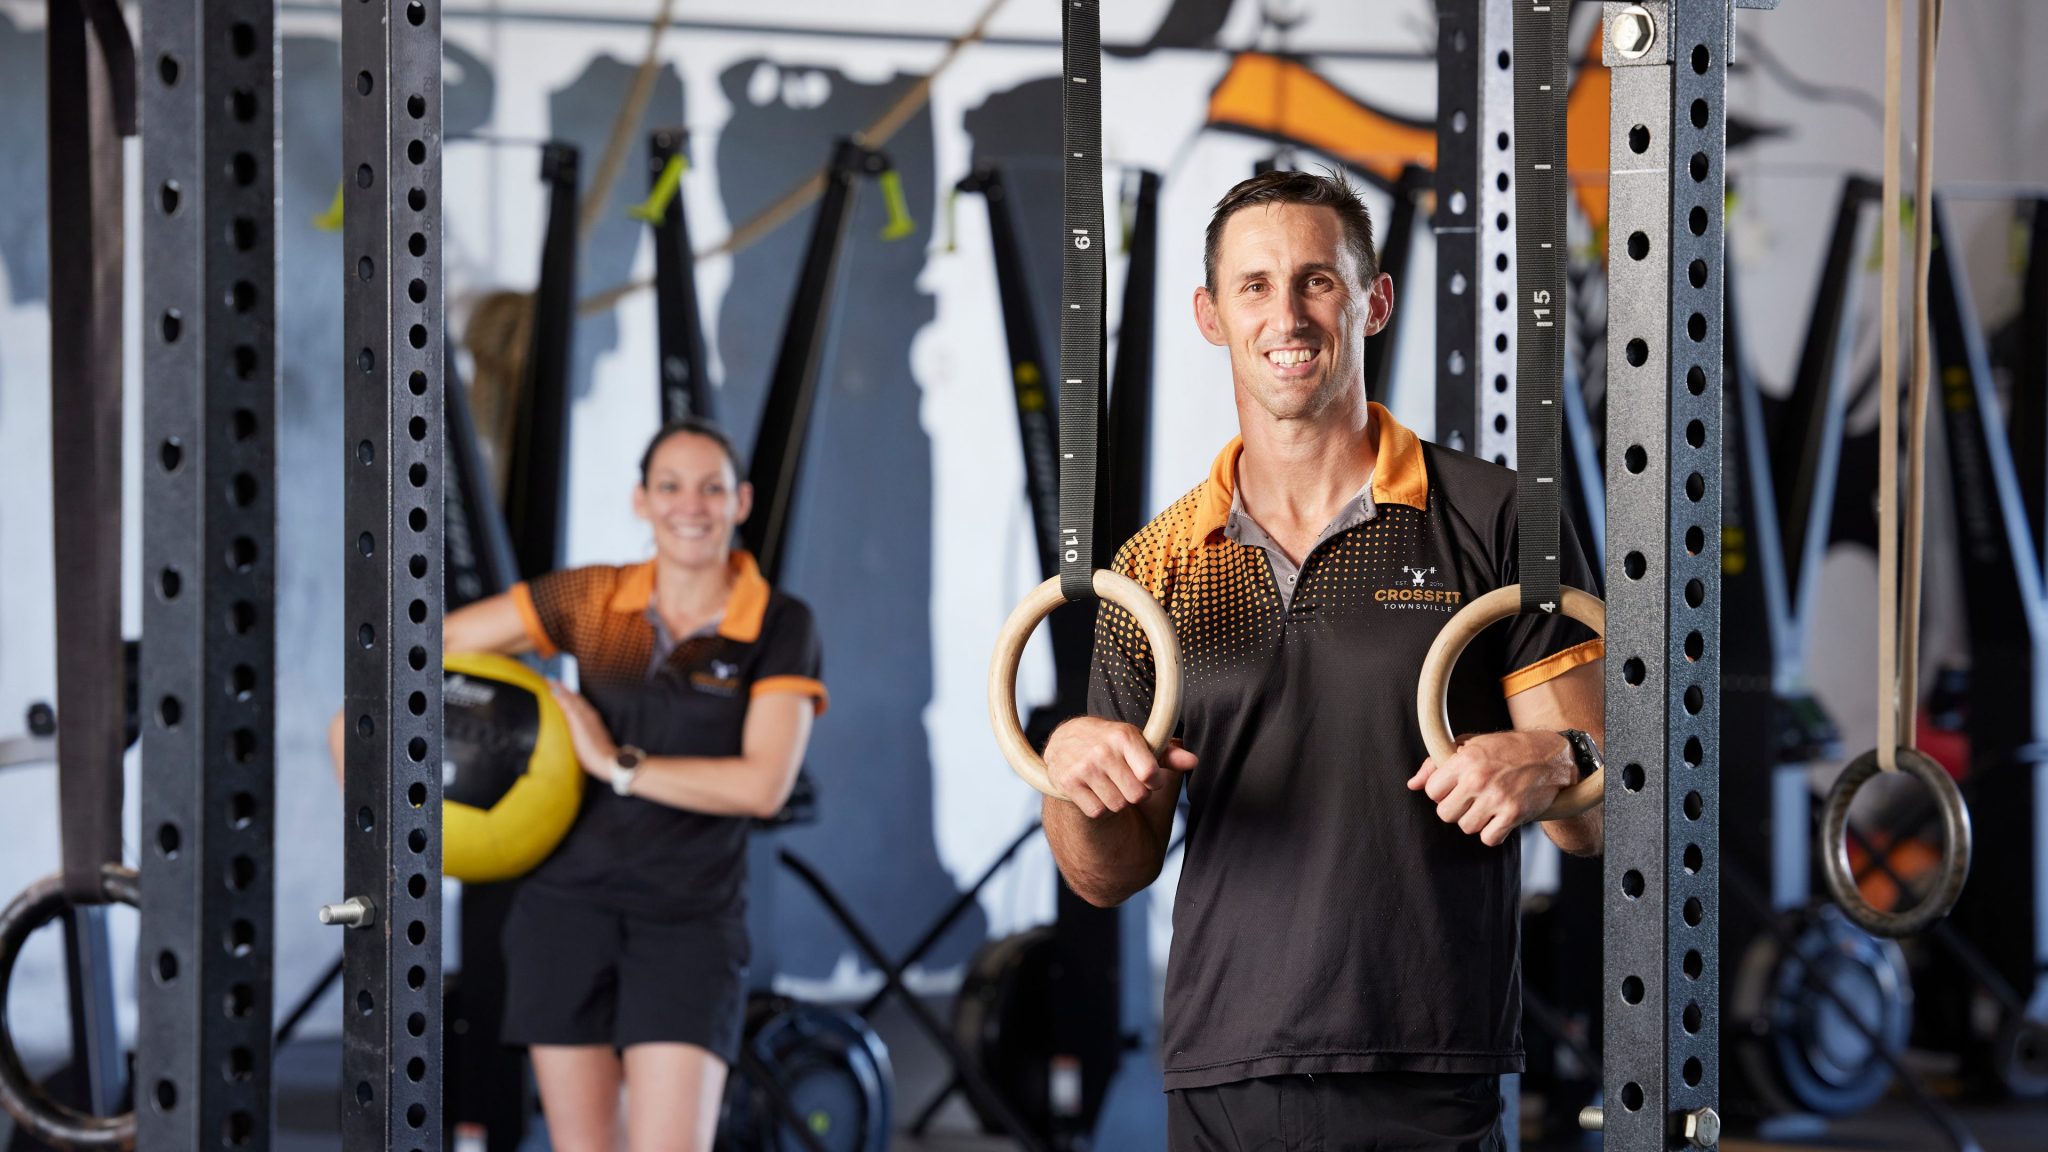 Local fitness business owner - financial services brand Cosca